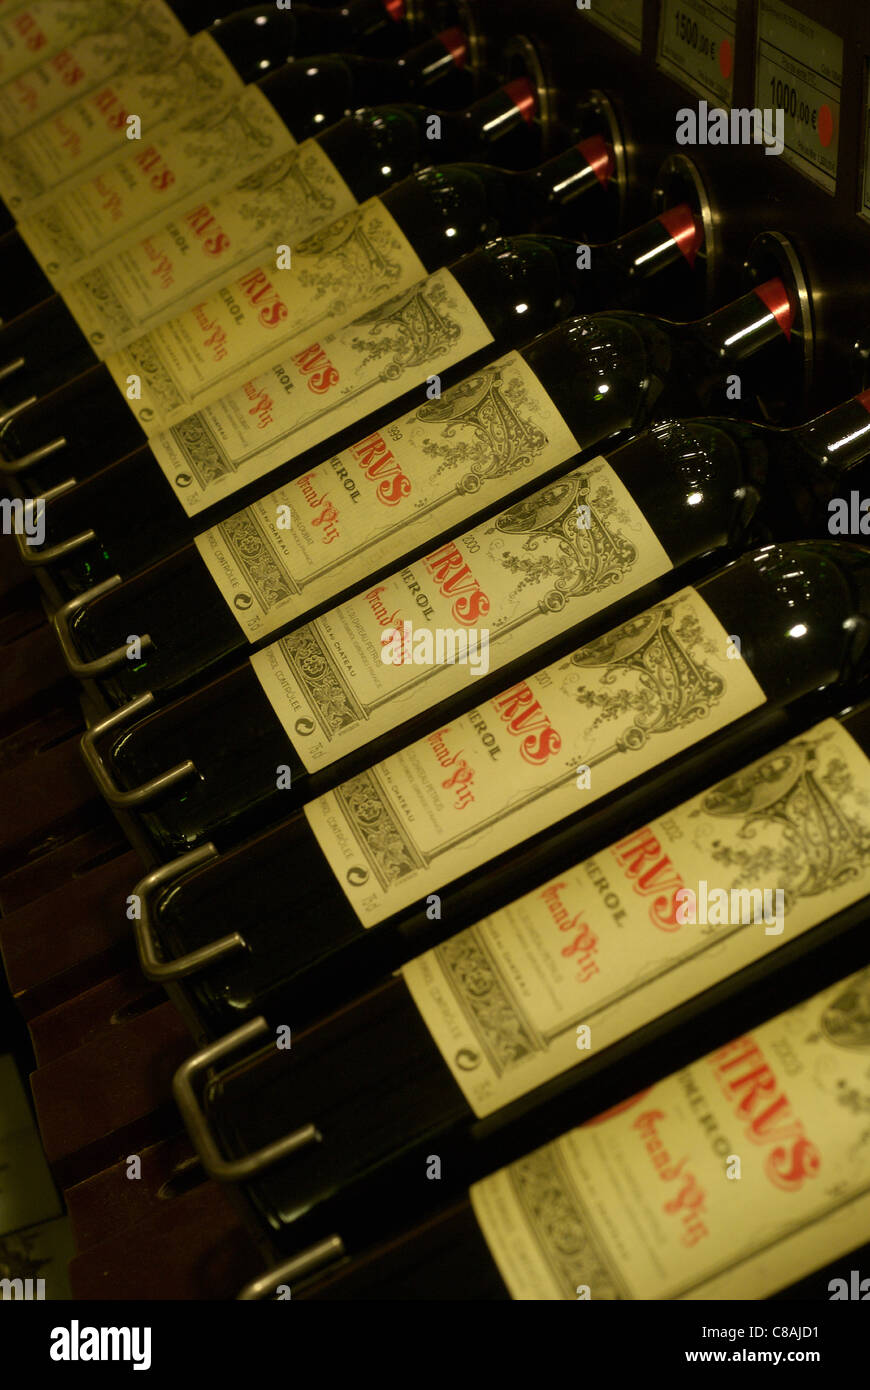 Bottles of Chateau Petrus wine in a line Stock Photo